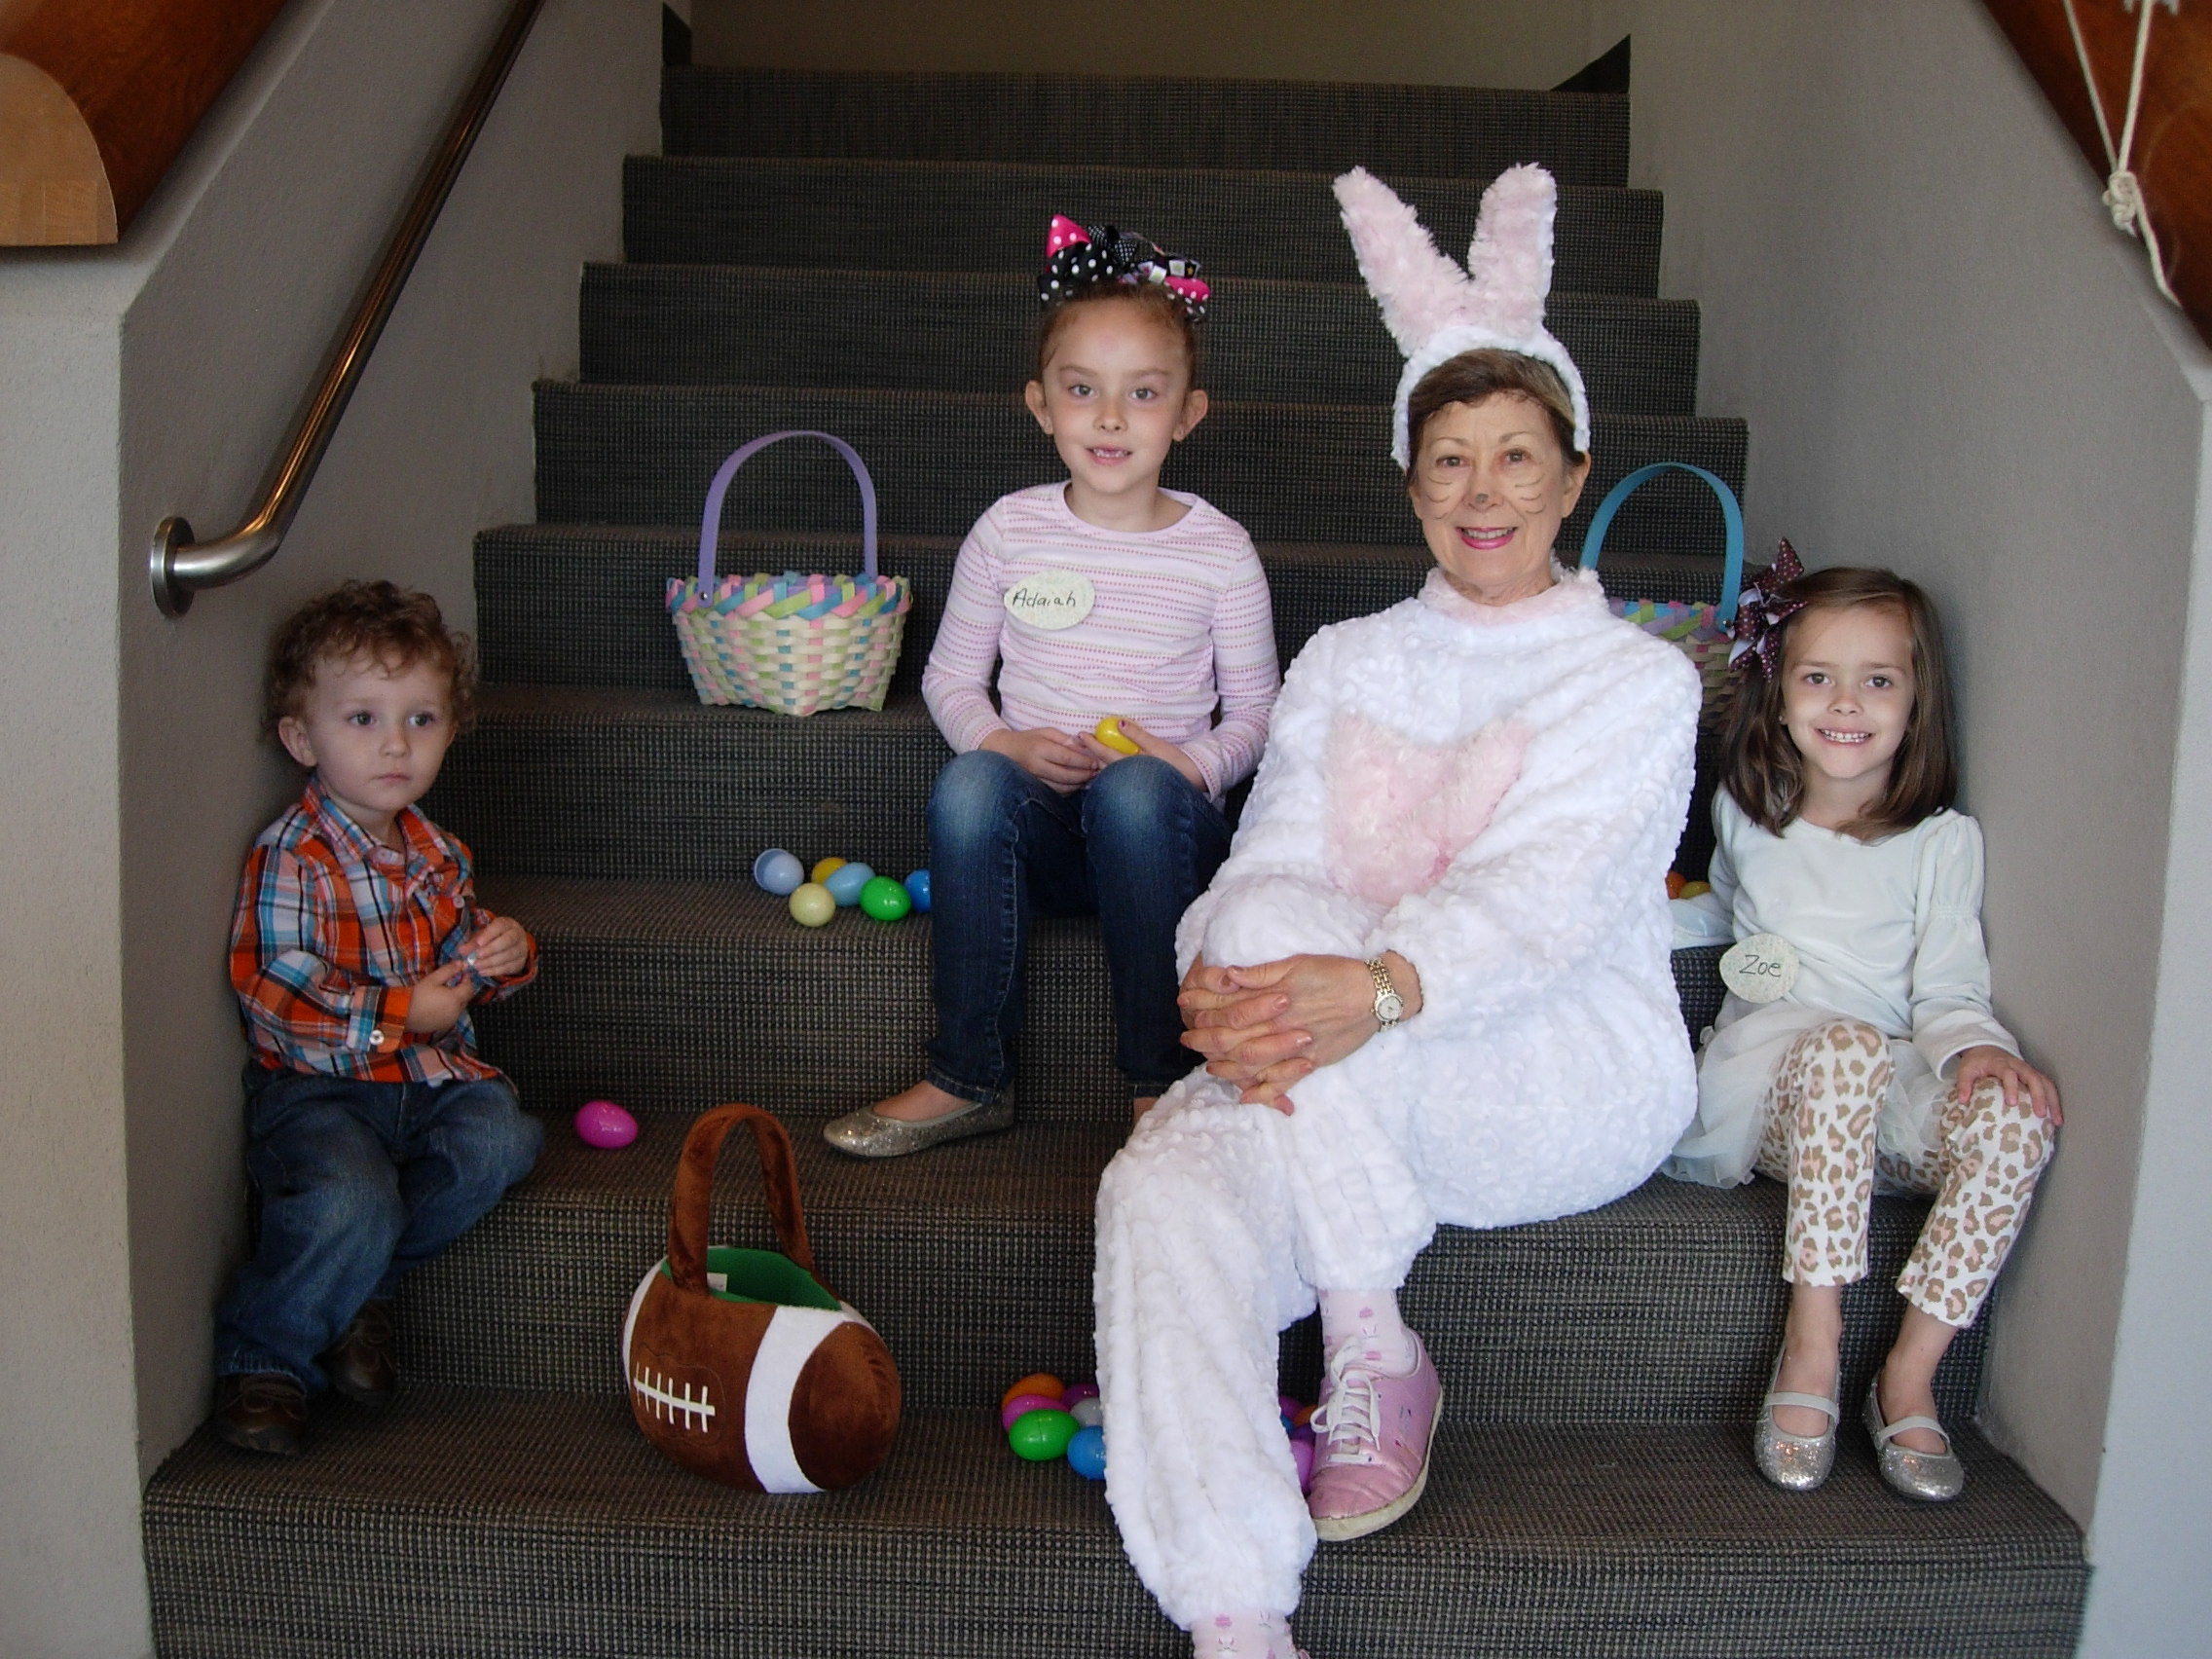 Easter Bunny Sandy Pickett and her little friends at the Easter egg hunt